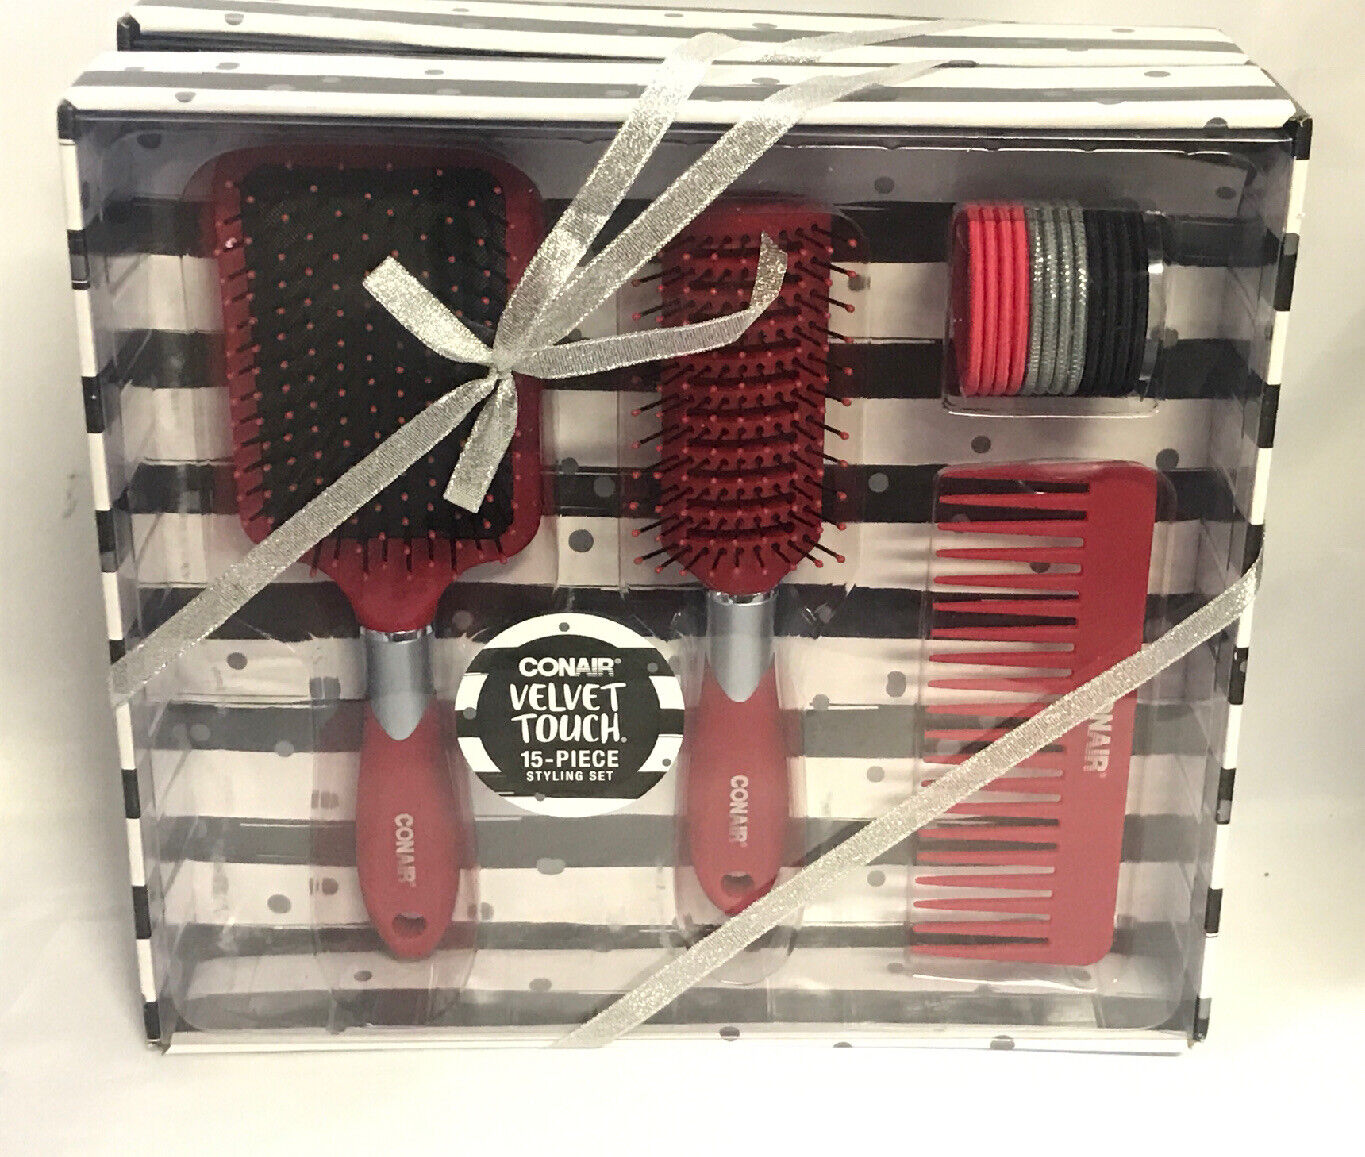 Conair Velvet Touch 15- Piece Styling Set, Assorted Colors